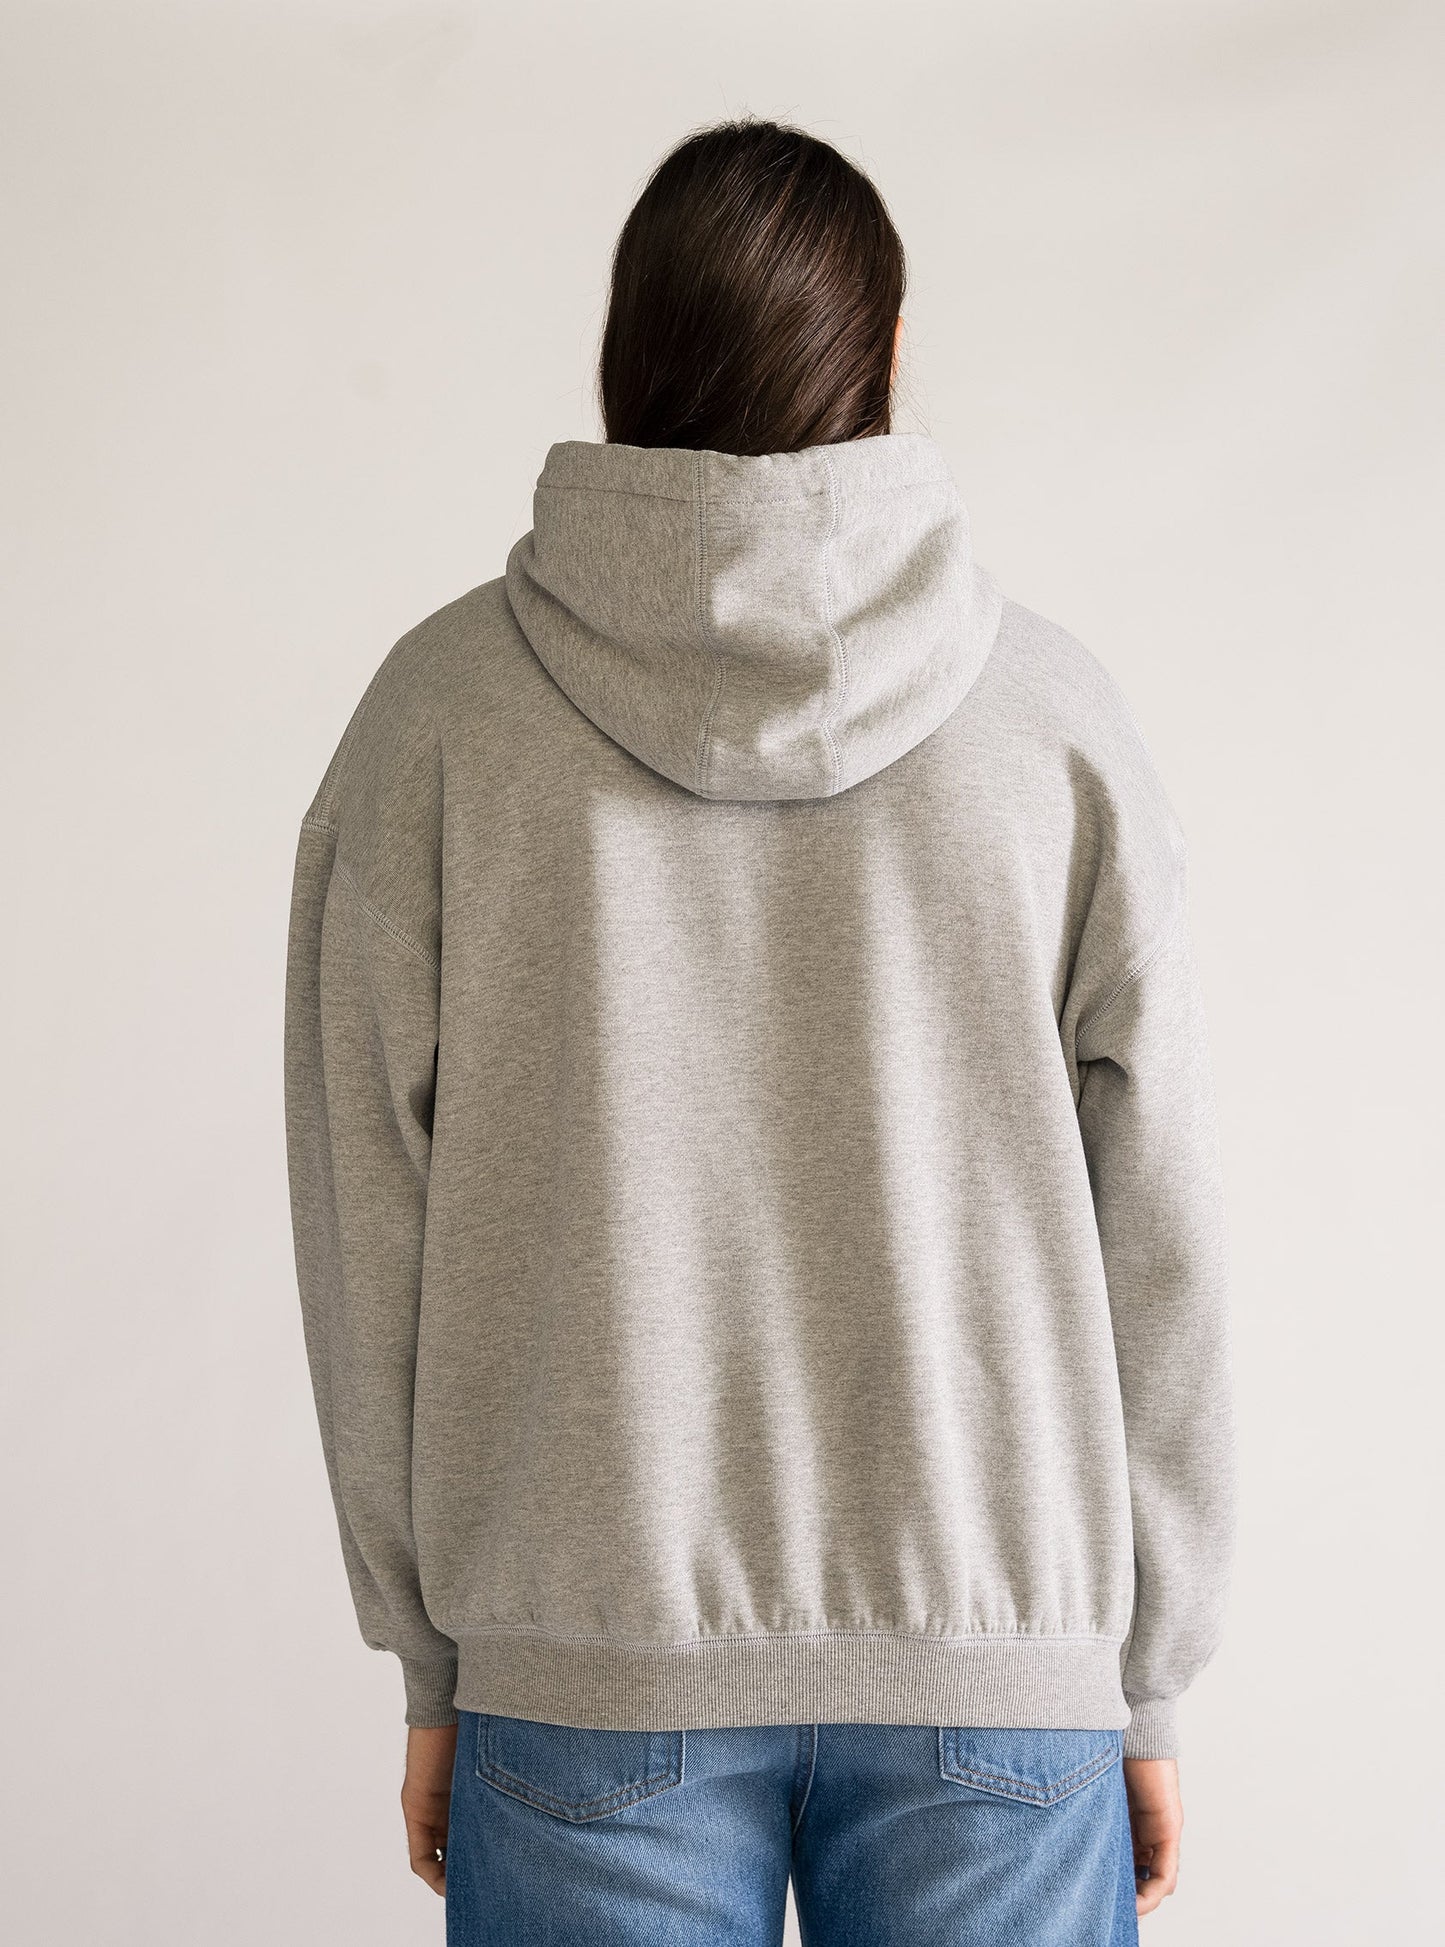 The Perfect Hoodie, Gris Claro